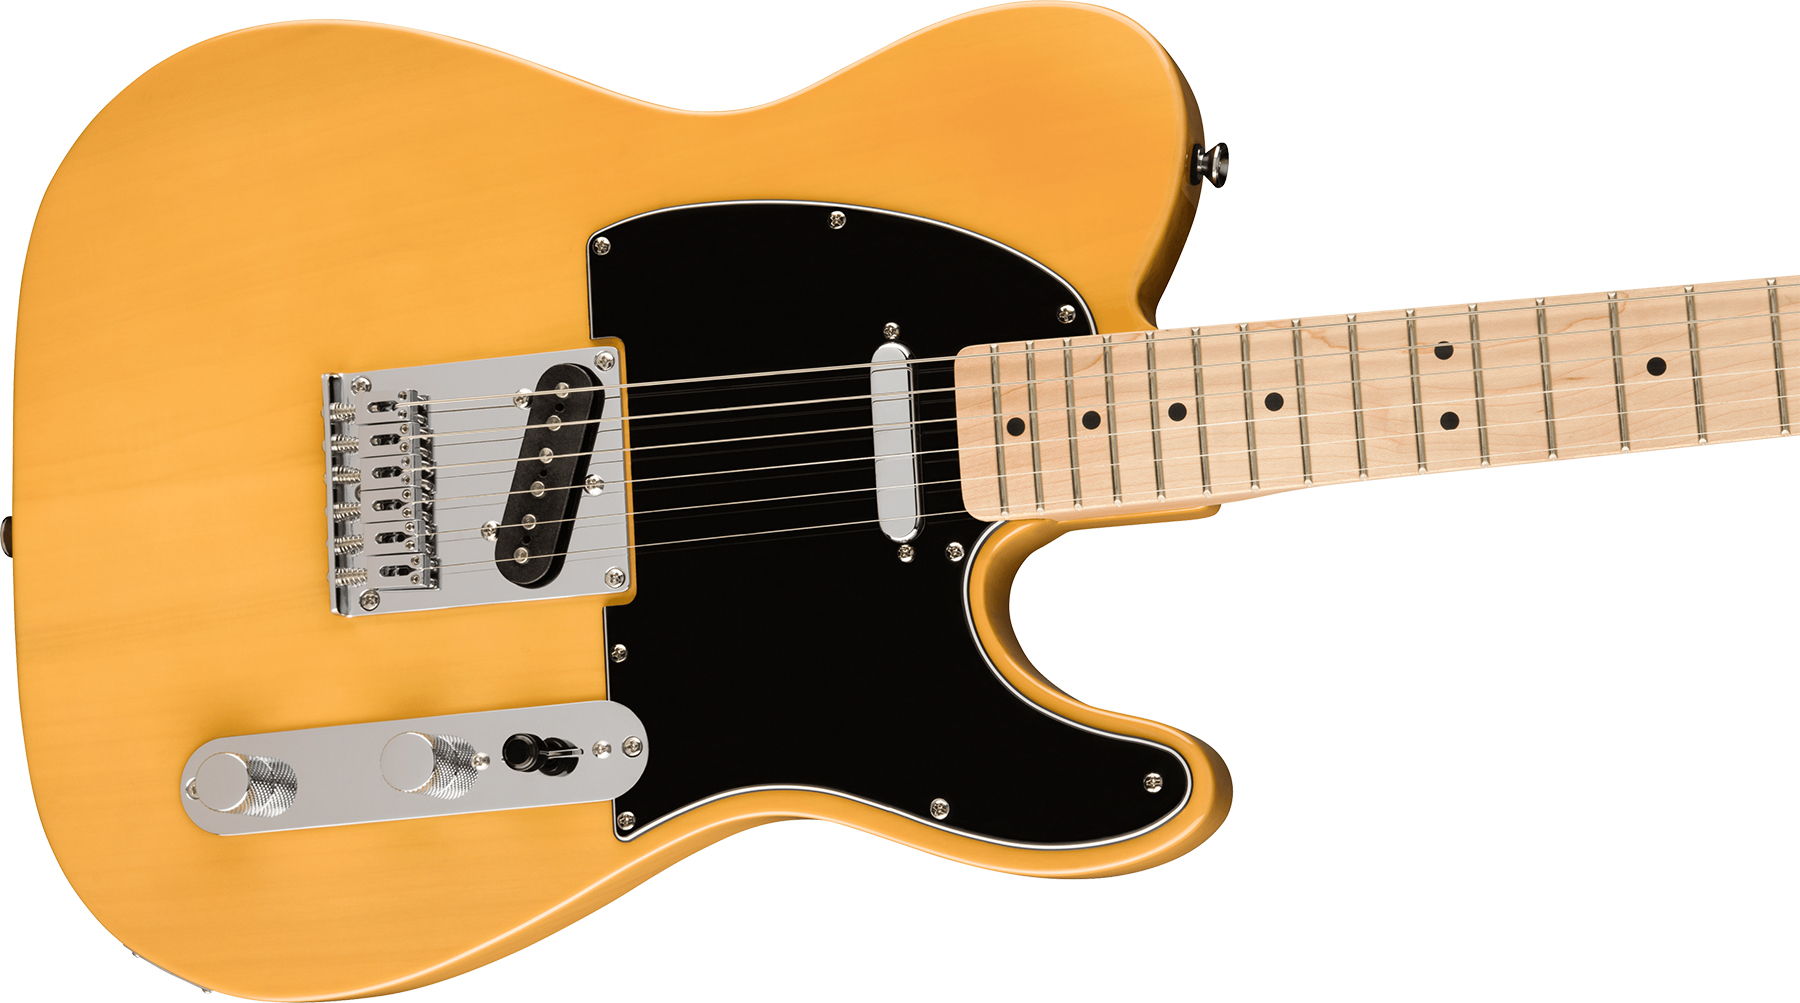 Squier Affinity Series Telecaster 2021 (MN) - butterscotch blonde